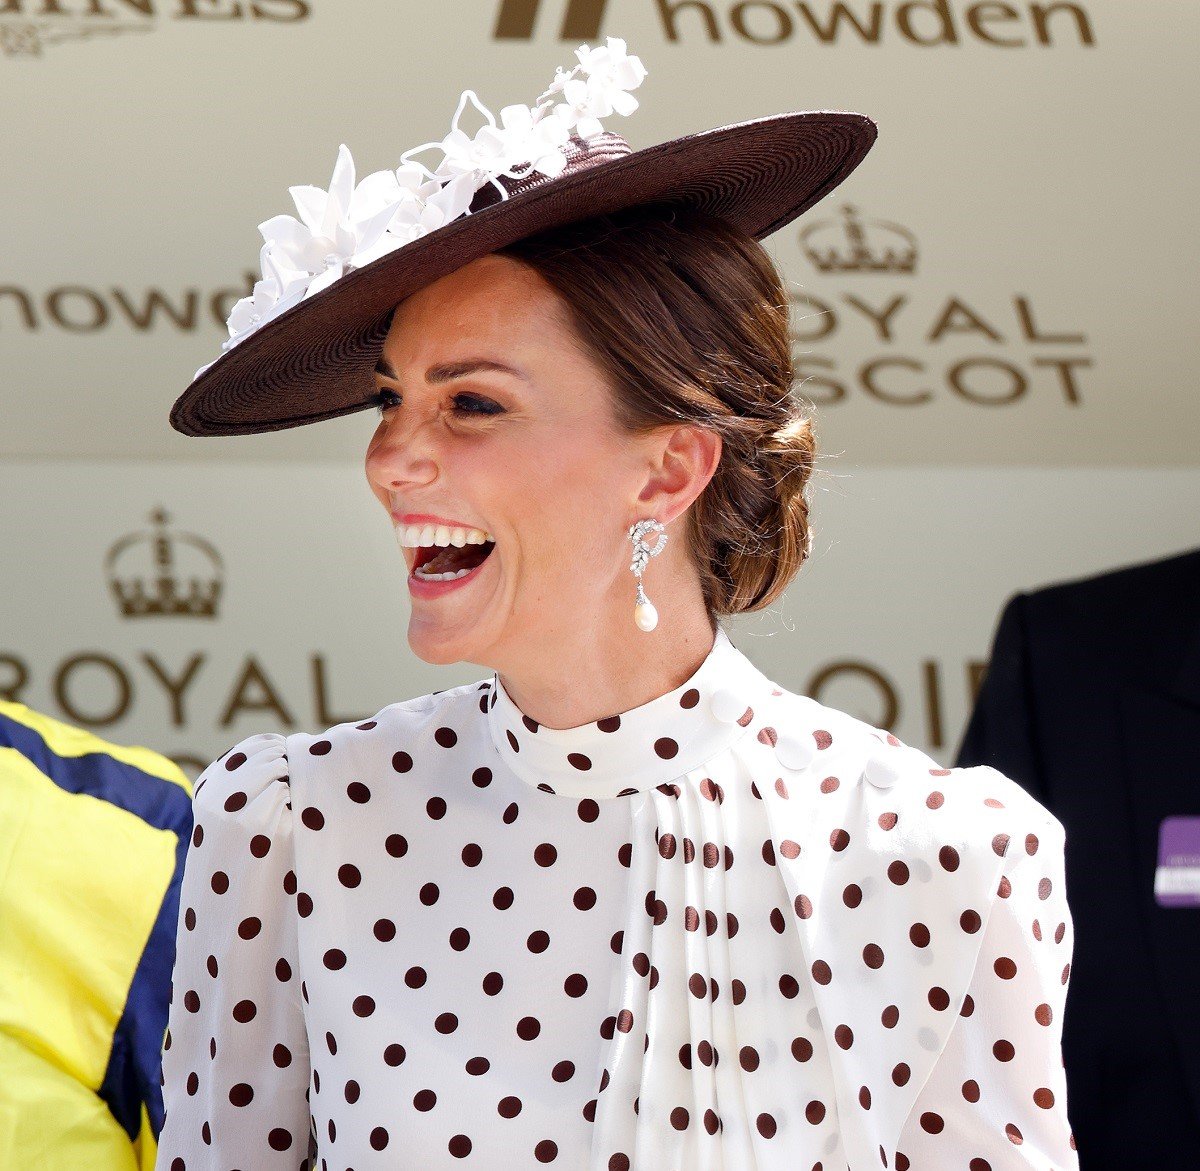 Kate Middleton laughing as she attends day 4 of Royal Ascot in a fascinator and Alessandra Rich dress